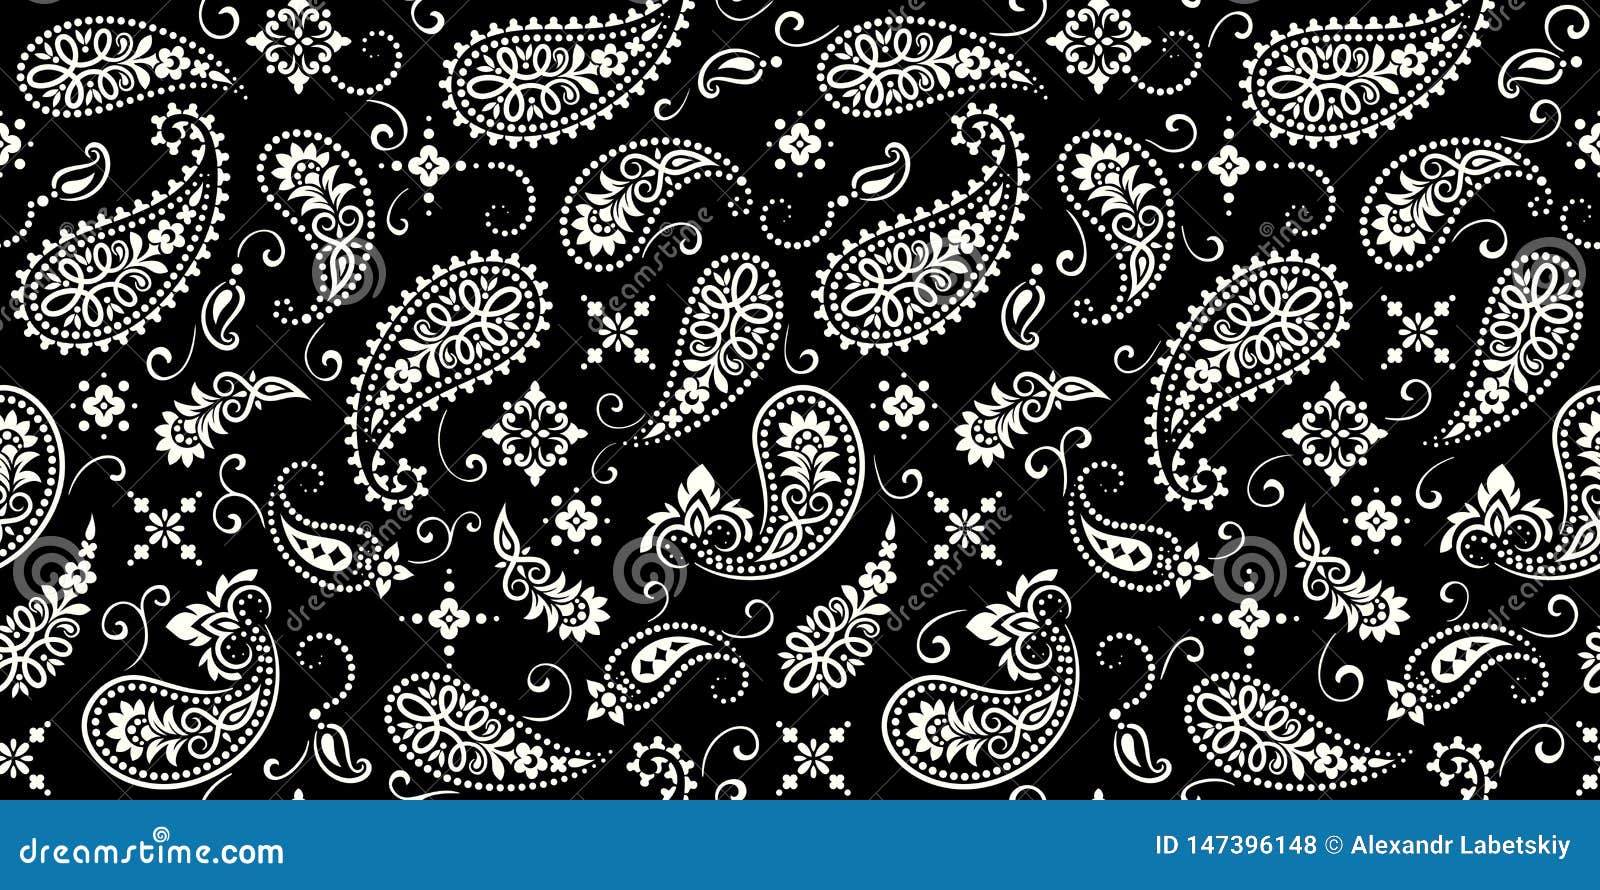 seamless pattern based on ornament paisley bandana print.  ornament paisley bandana print. silk neck scarf or